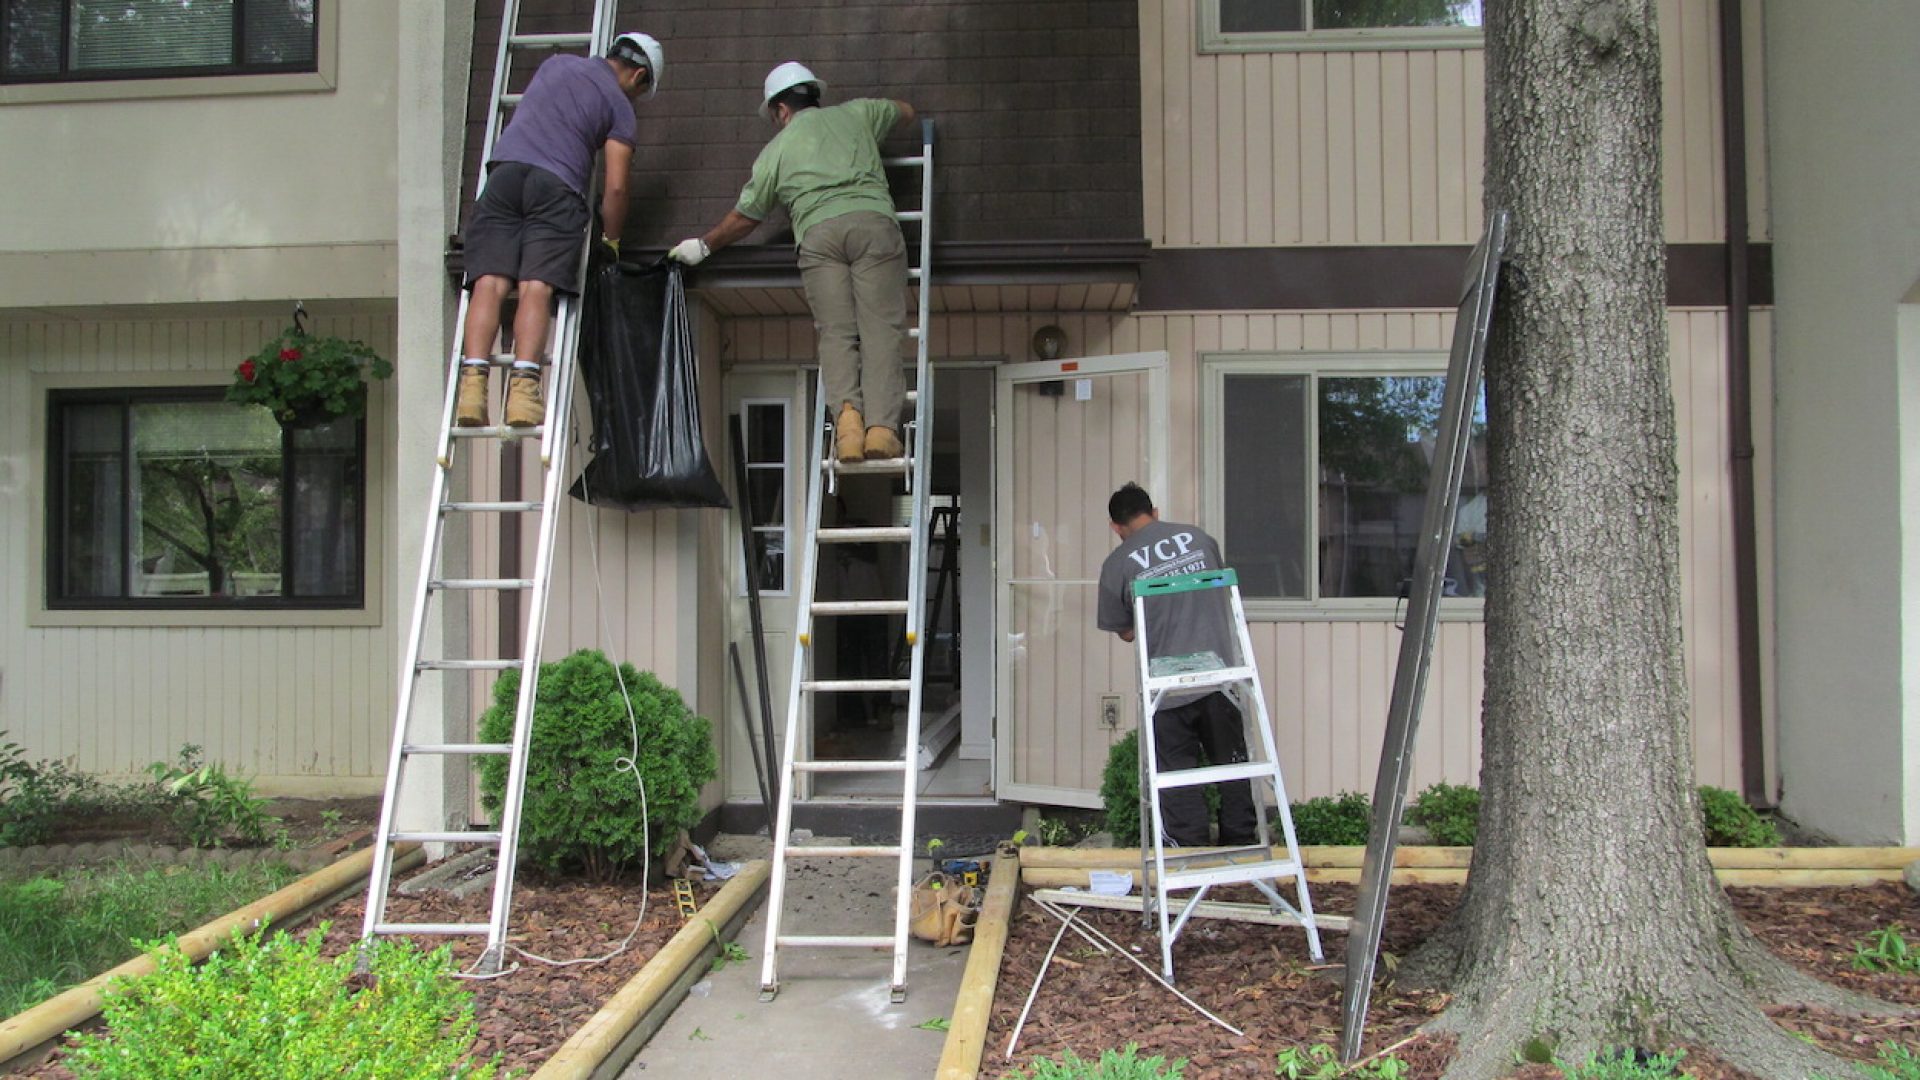 Helping renovate a townhome for HomeAid